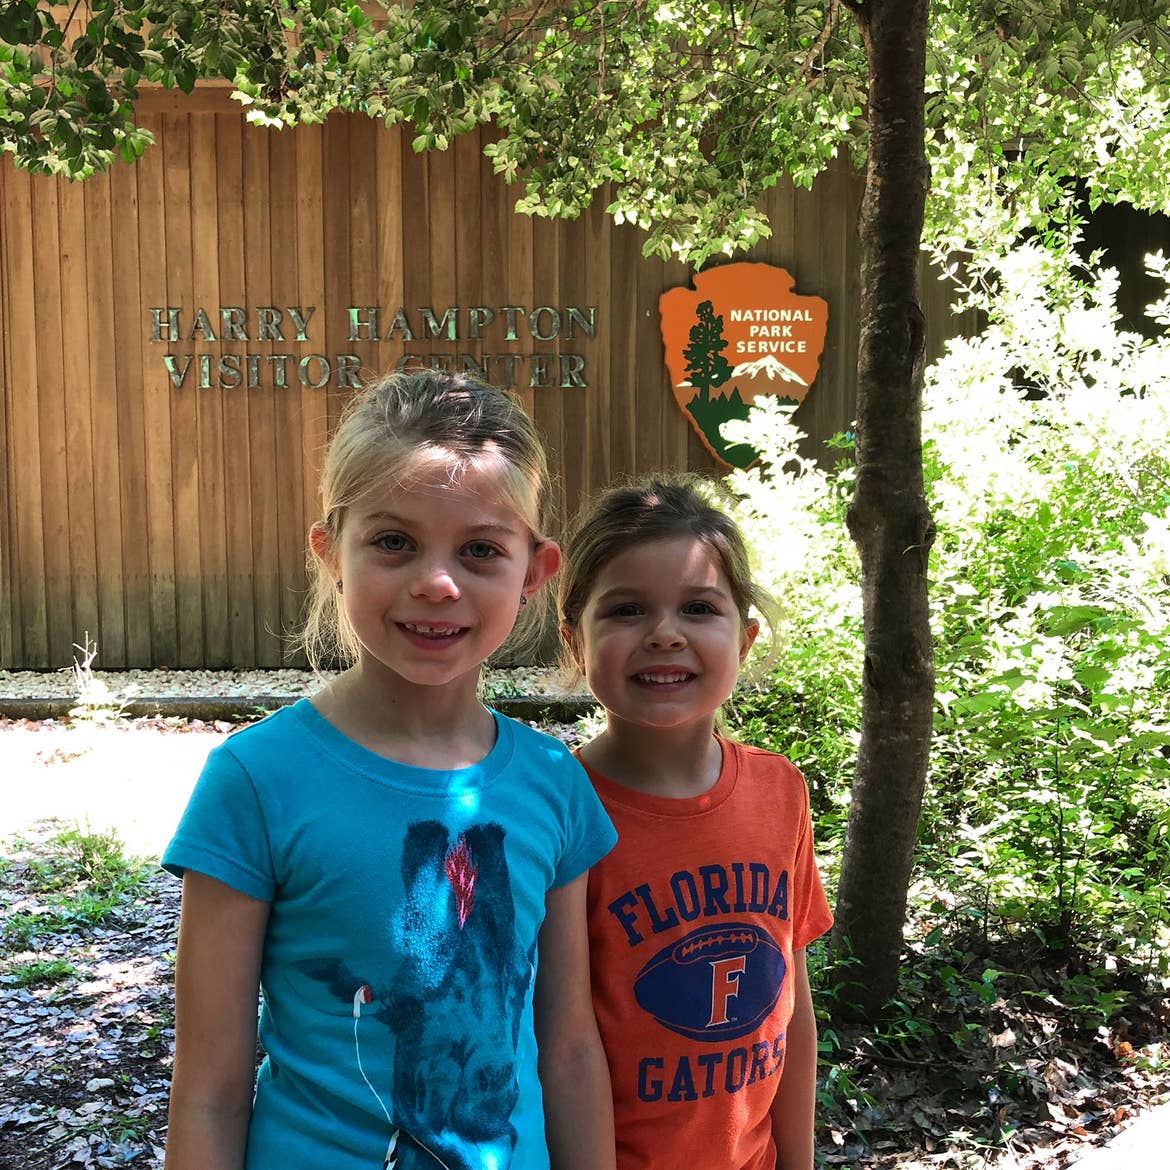 Author, Chris Johnstons' daughters, Kyndall (left), and Kyler (right) pose with a sign that reads, 'Harry Hampton Visitor Center, National Park Service.'